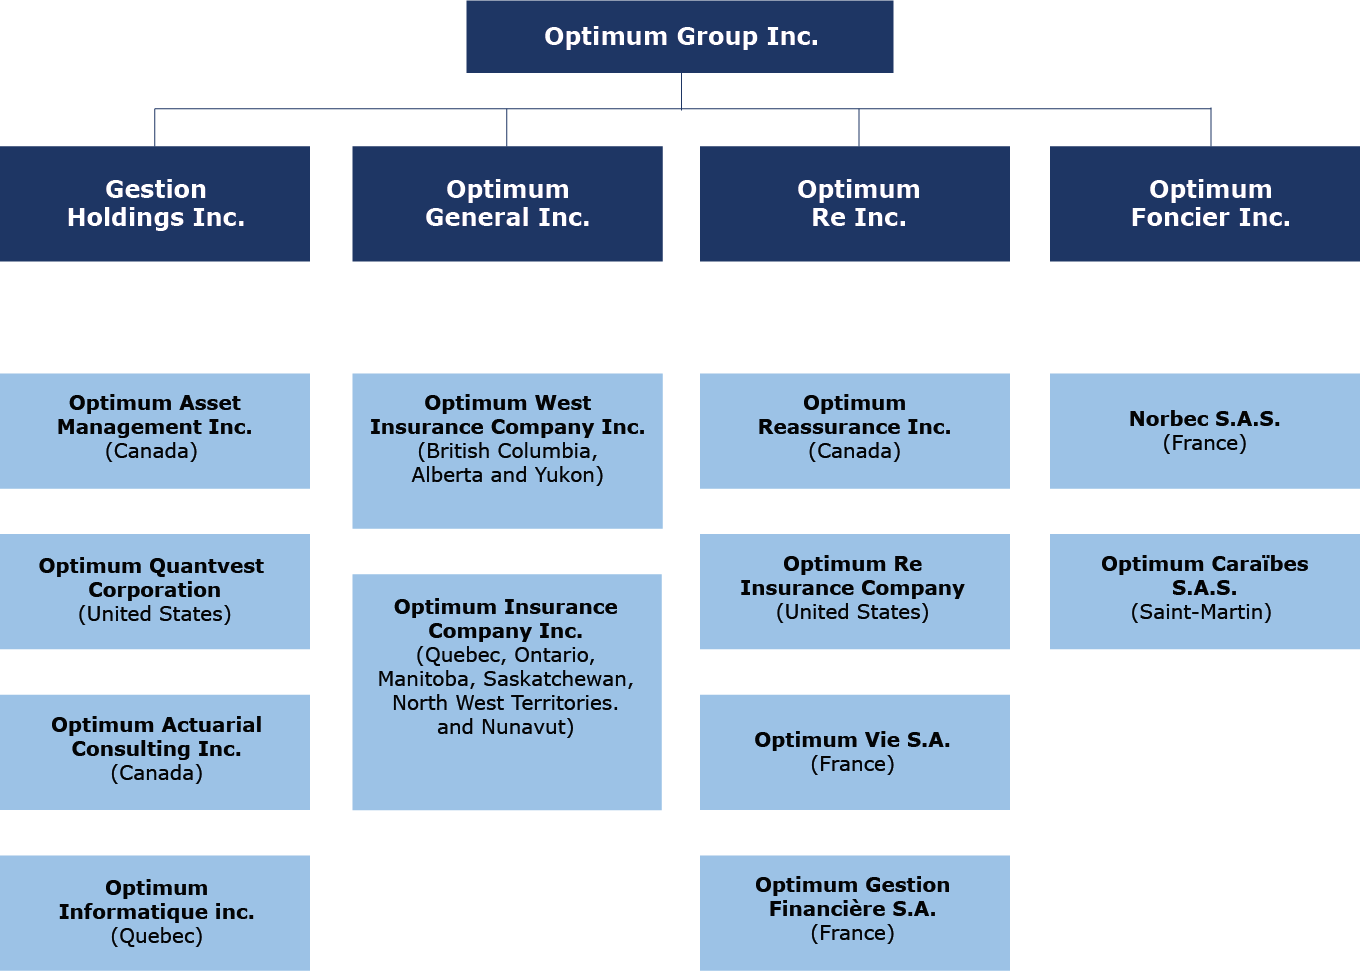 The Optimum Group Inc. acts as the main holding company by overseeing four holding companies: Optimum Holdings Inc., Optimum General Inc., Optimum Re Inc. and Optimum Foncier Inc.   The holding company Optimum Holdings Inc. has three subsidiaries located in Québec, Optimum Asset Management Inc., Optimum Consultants & Actuaries Inc. and Optimum Informatique Inc., as well as a subsidiary located in the United States, Optimum Quantvest Corporation.  The holding company Optimum General Inc. has three subsidiaries across Canada: Optimum West Insurance Company Inc. in British Columbia, Alberta and Yukon, Optimum Insurance Company Inc. in Québec, Ontario, Manitoba, Saskatchewan, the Northwest Territories and Nunavut, and Optimum Farm Insurance Inc. in Québec.